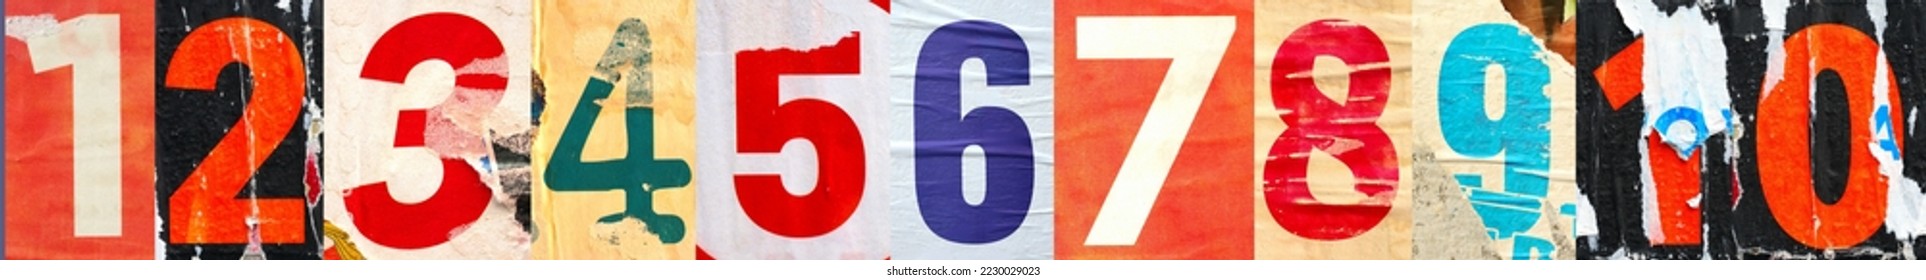 Collage of numbers one to ten or 1-10, ripped torn advertisement street posters grunge creased crumpled paper texture background placard backdrop surface